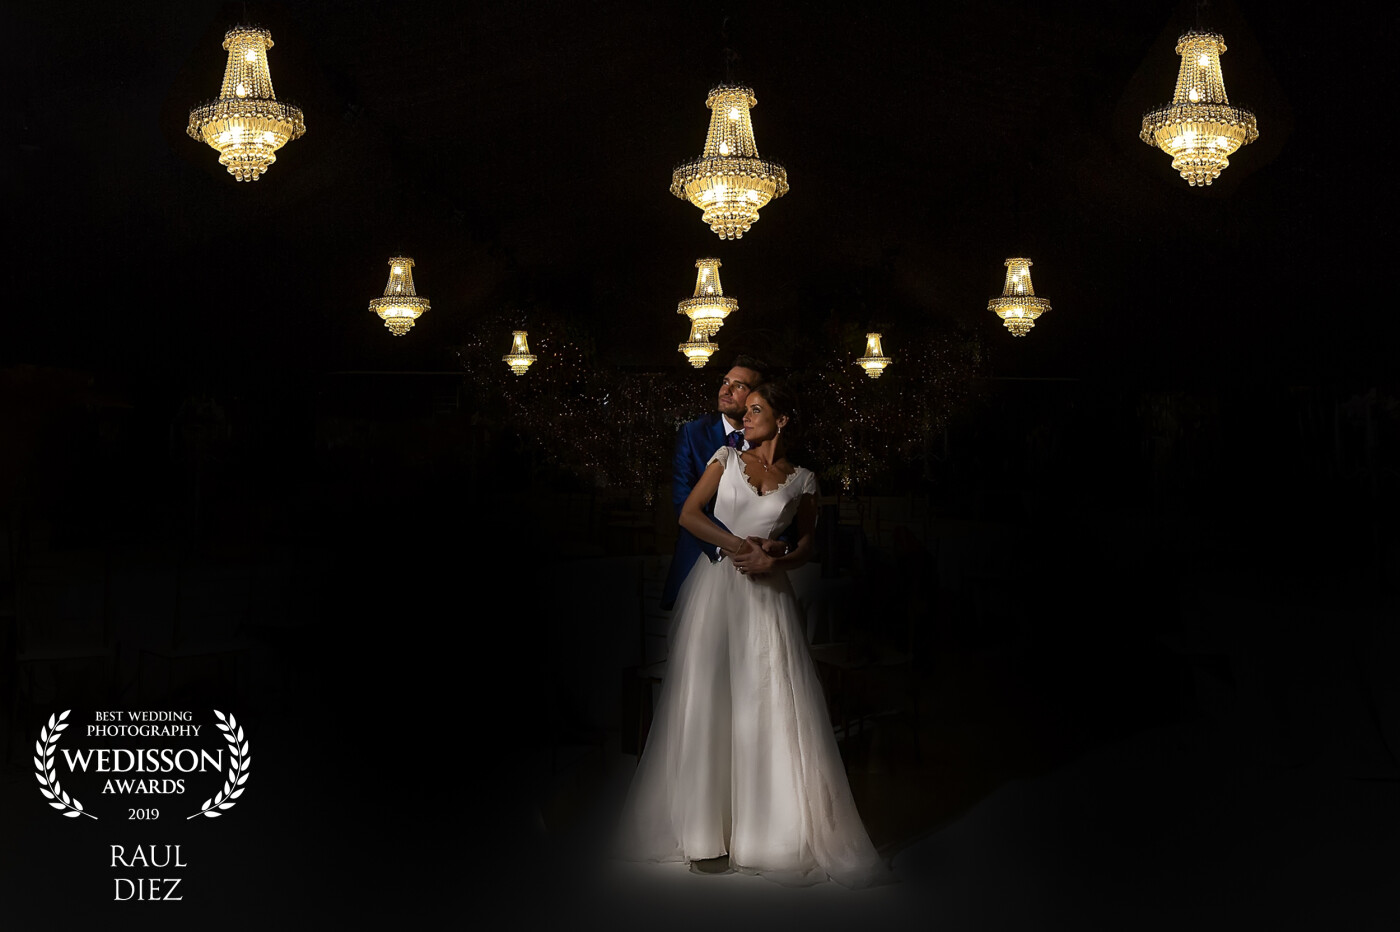 When I entered this room and saw those lamps, I quickly visualized this picture in my mind. Just a few minutes before the first dance I told the couple what I wanted to do. They told me that yes and  then i shoot this beautiful photo.